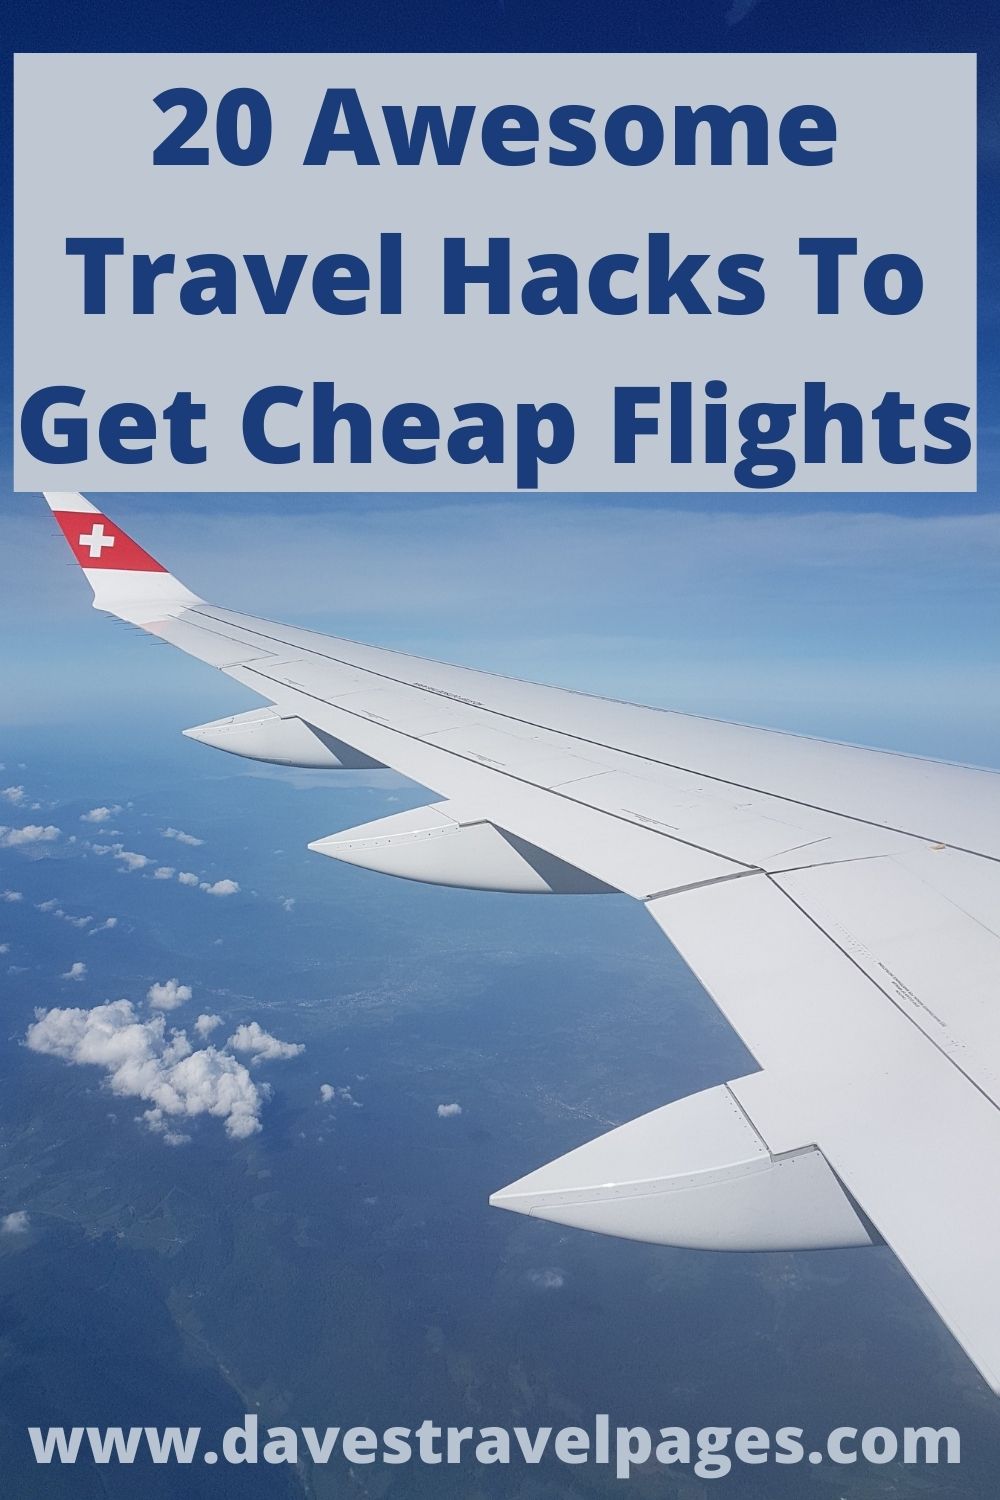 20 awesome travel hacks to get cheap flights